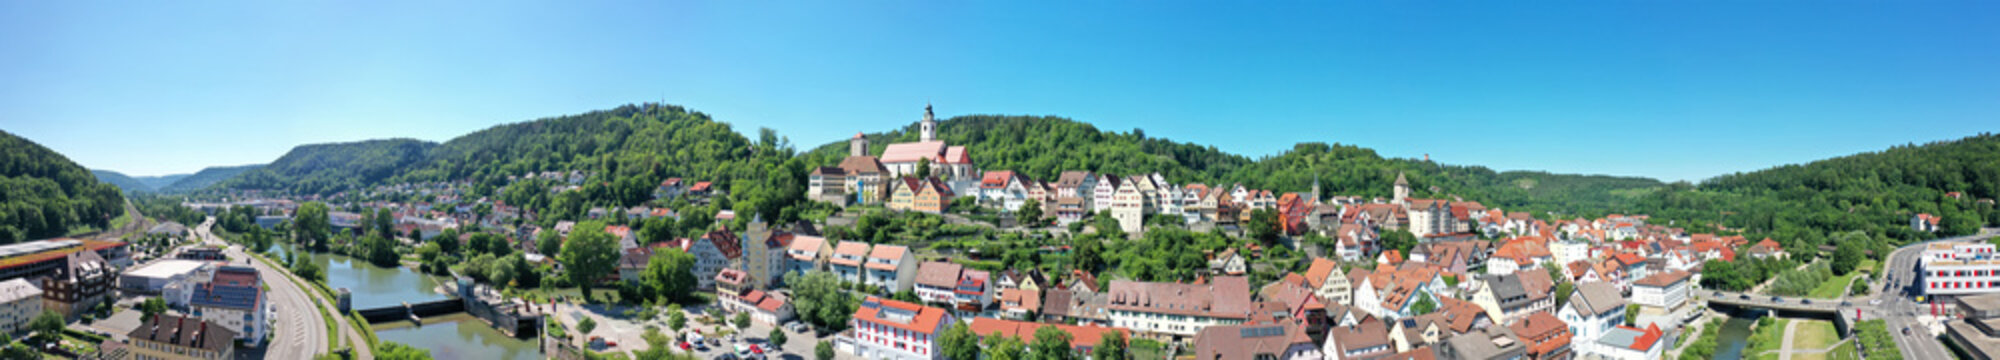 panoramic view to Horb Germany